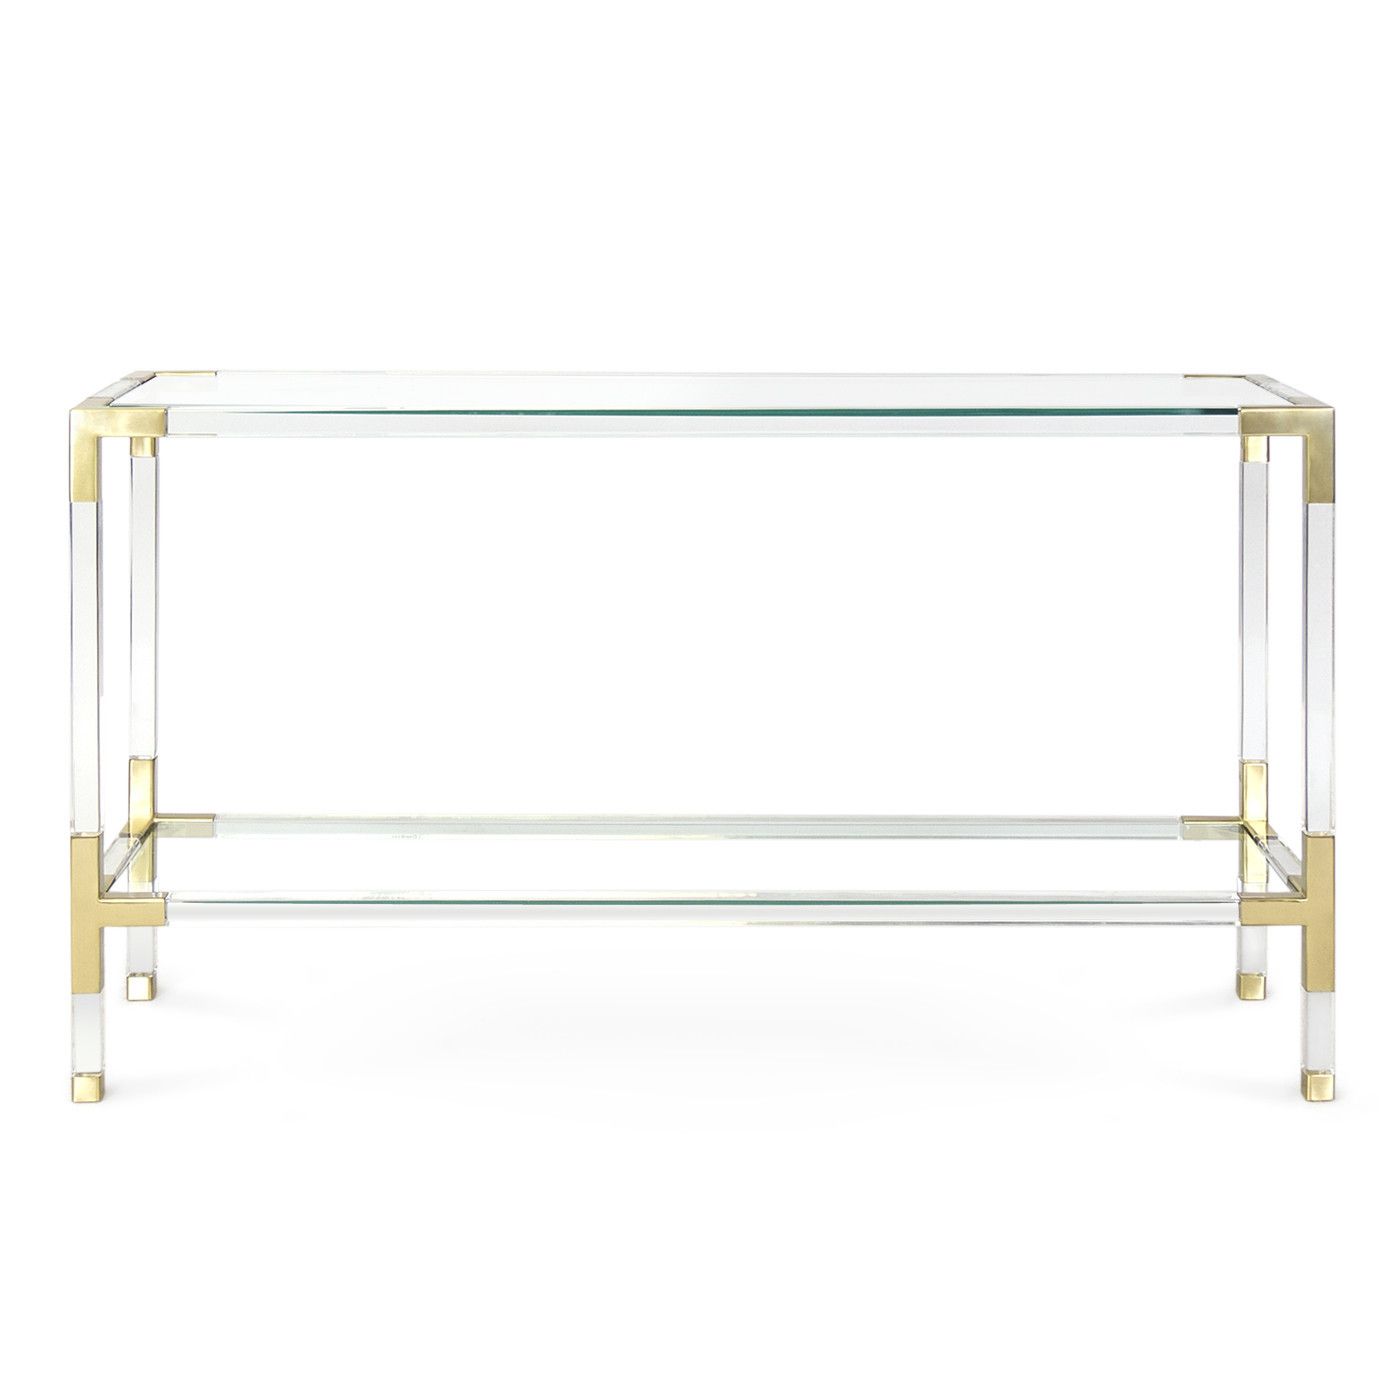 Jonathan Adler Jacques Console Table | Vinterior For Jacque Console Tables (View 15 of 20)